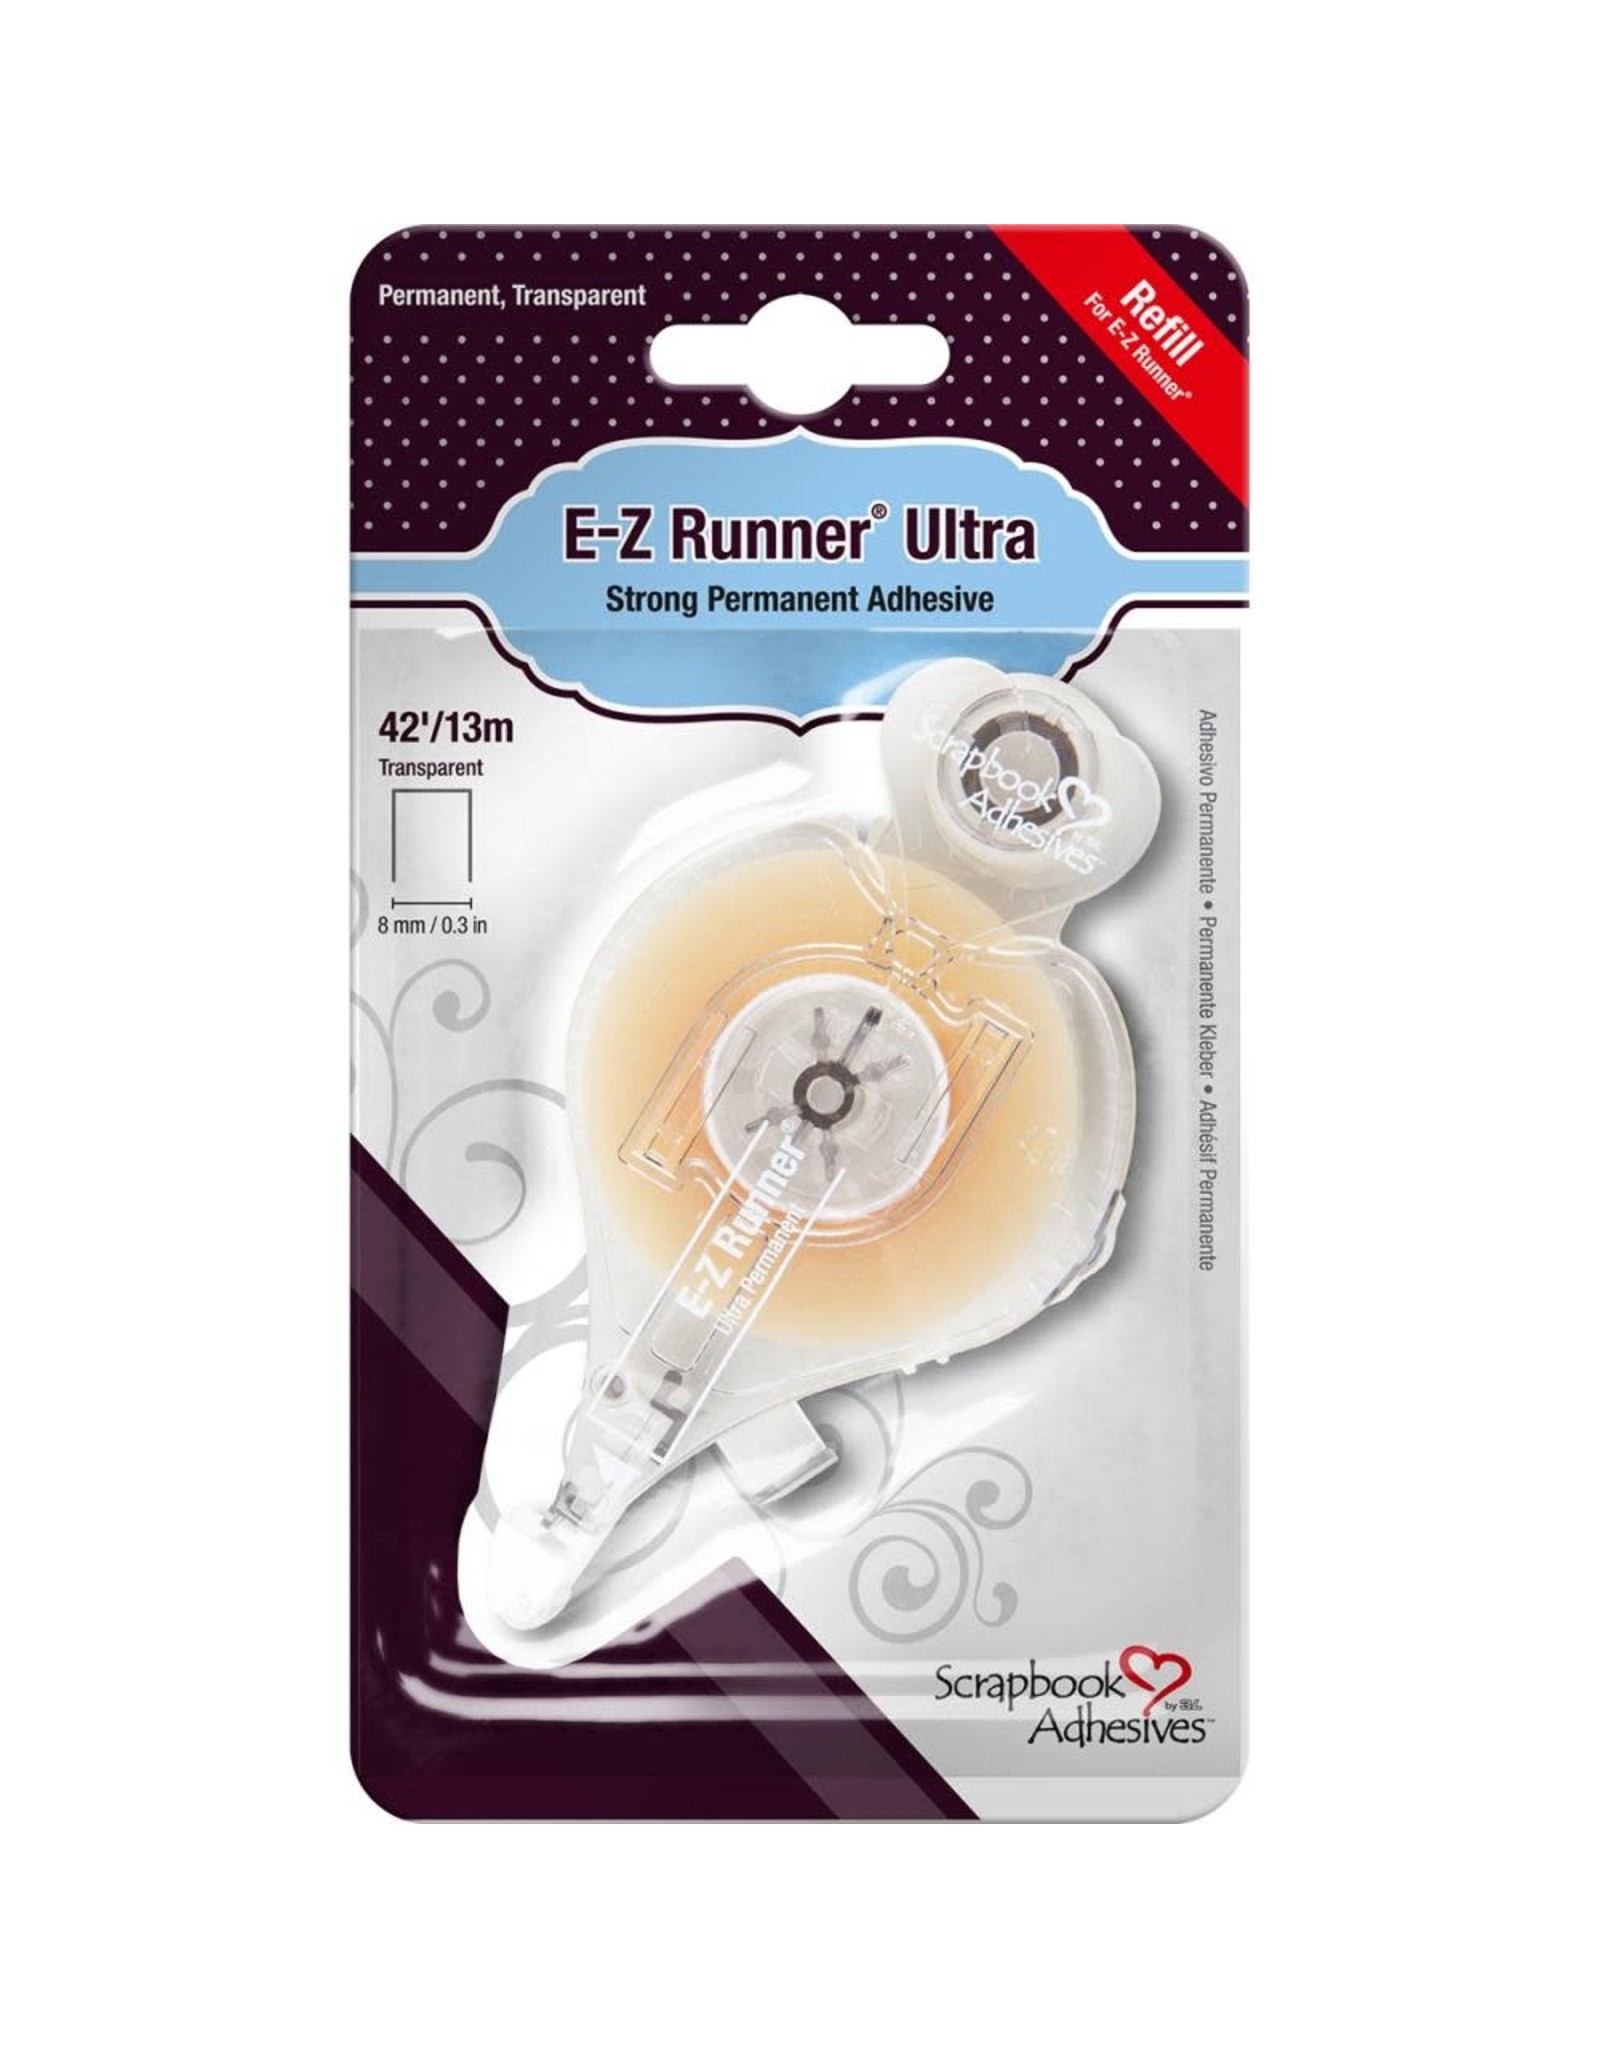 Scrapbook Adhesives E-Z Runner Ultra Refill-small clear